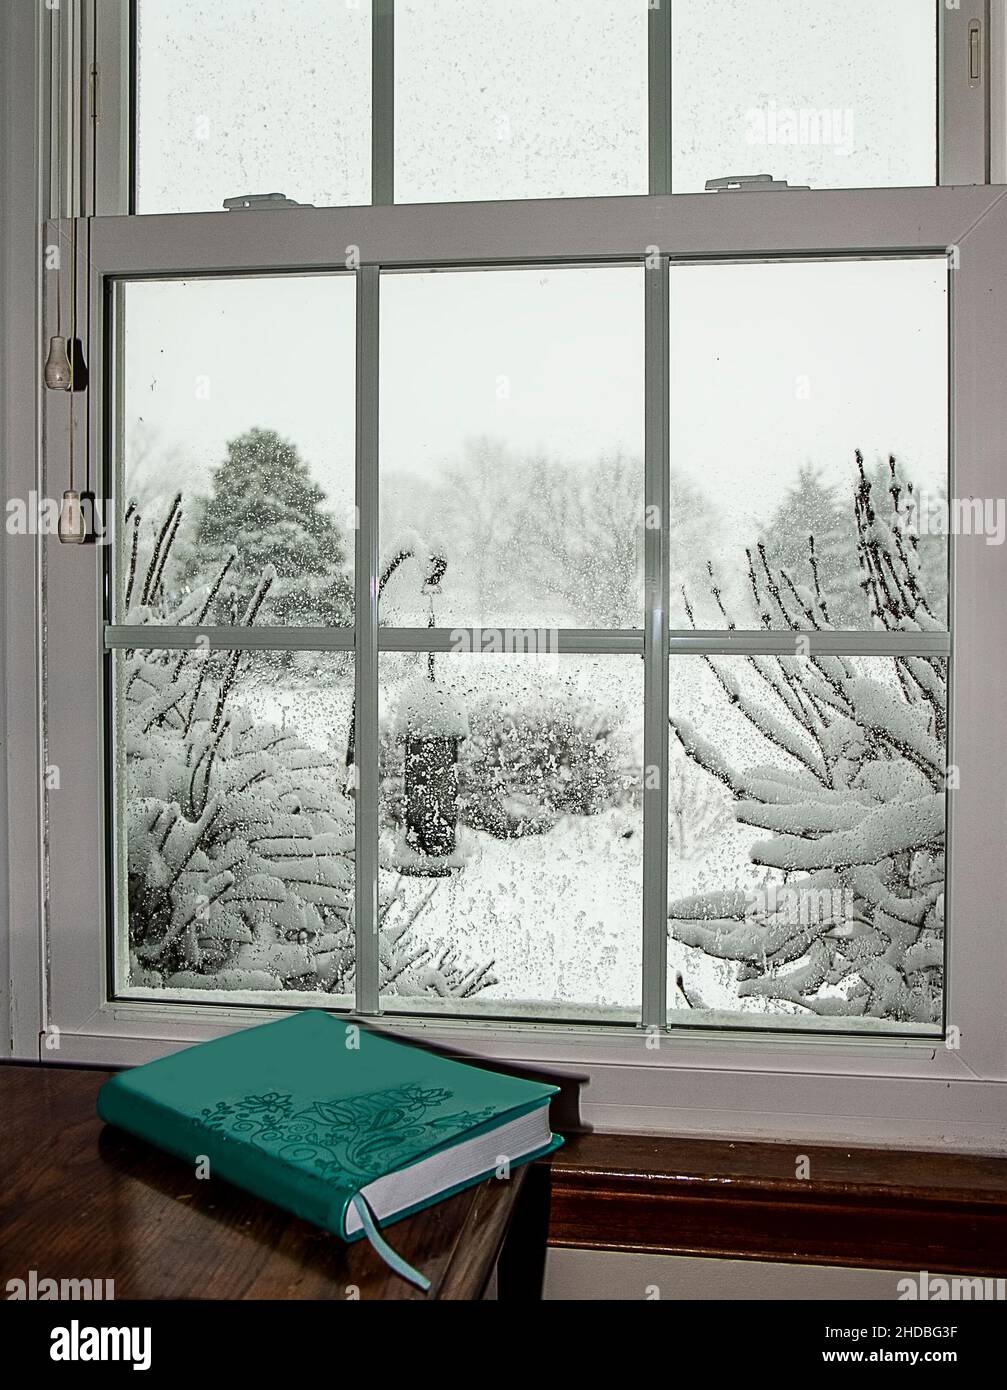 Window view of snow after snowstorm on branches and trees. Stock Photo